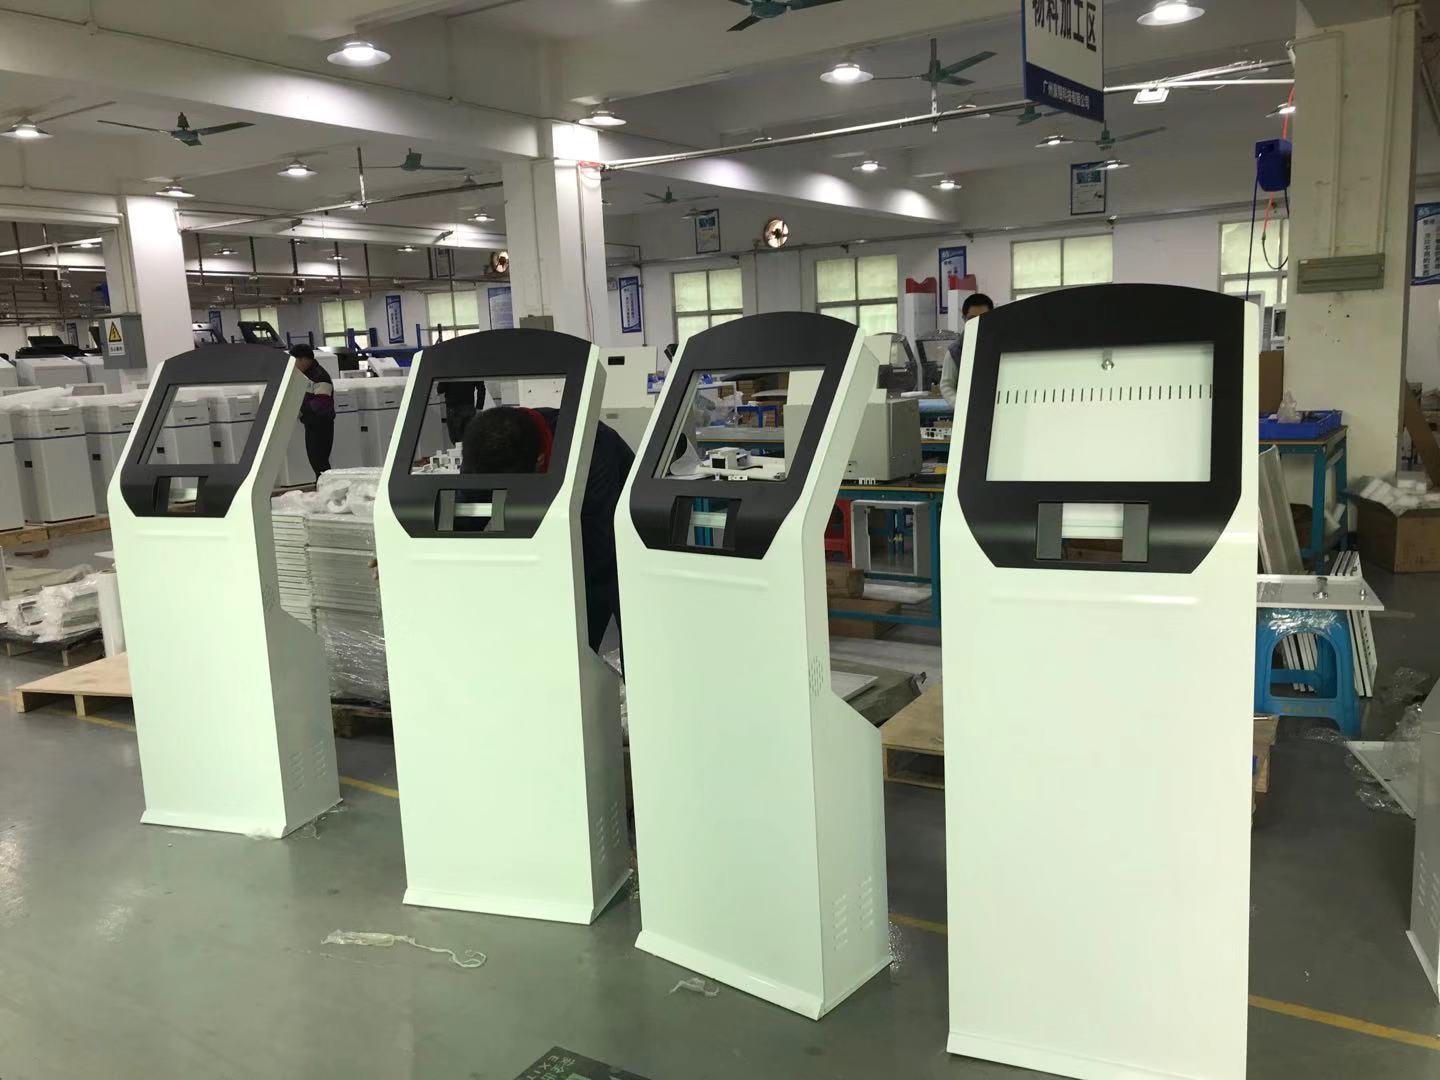 Sample of 4 pcs queuing machines ready to ship